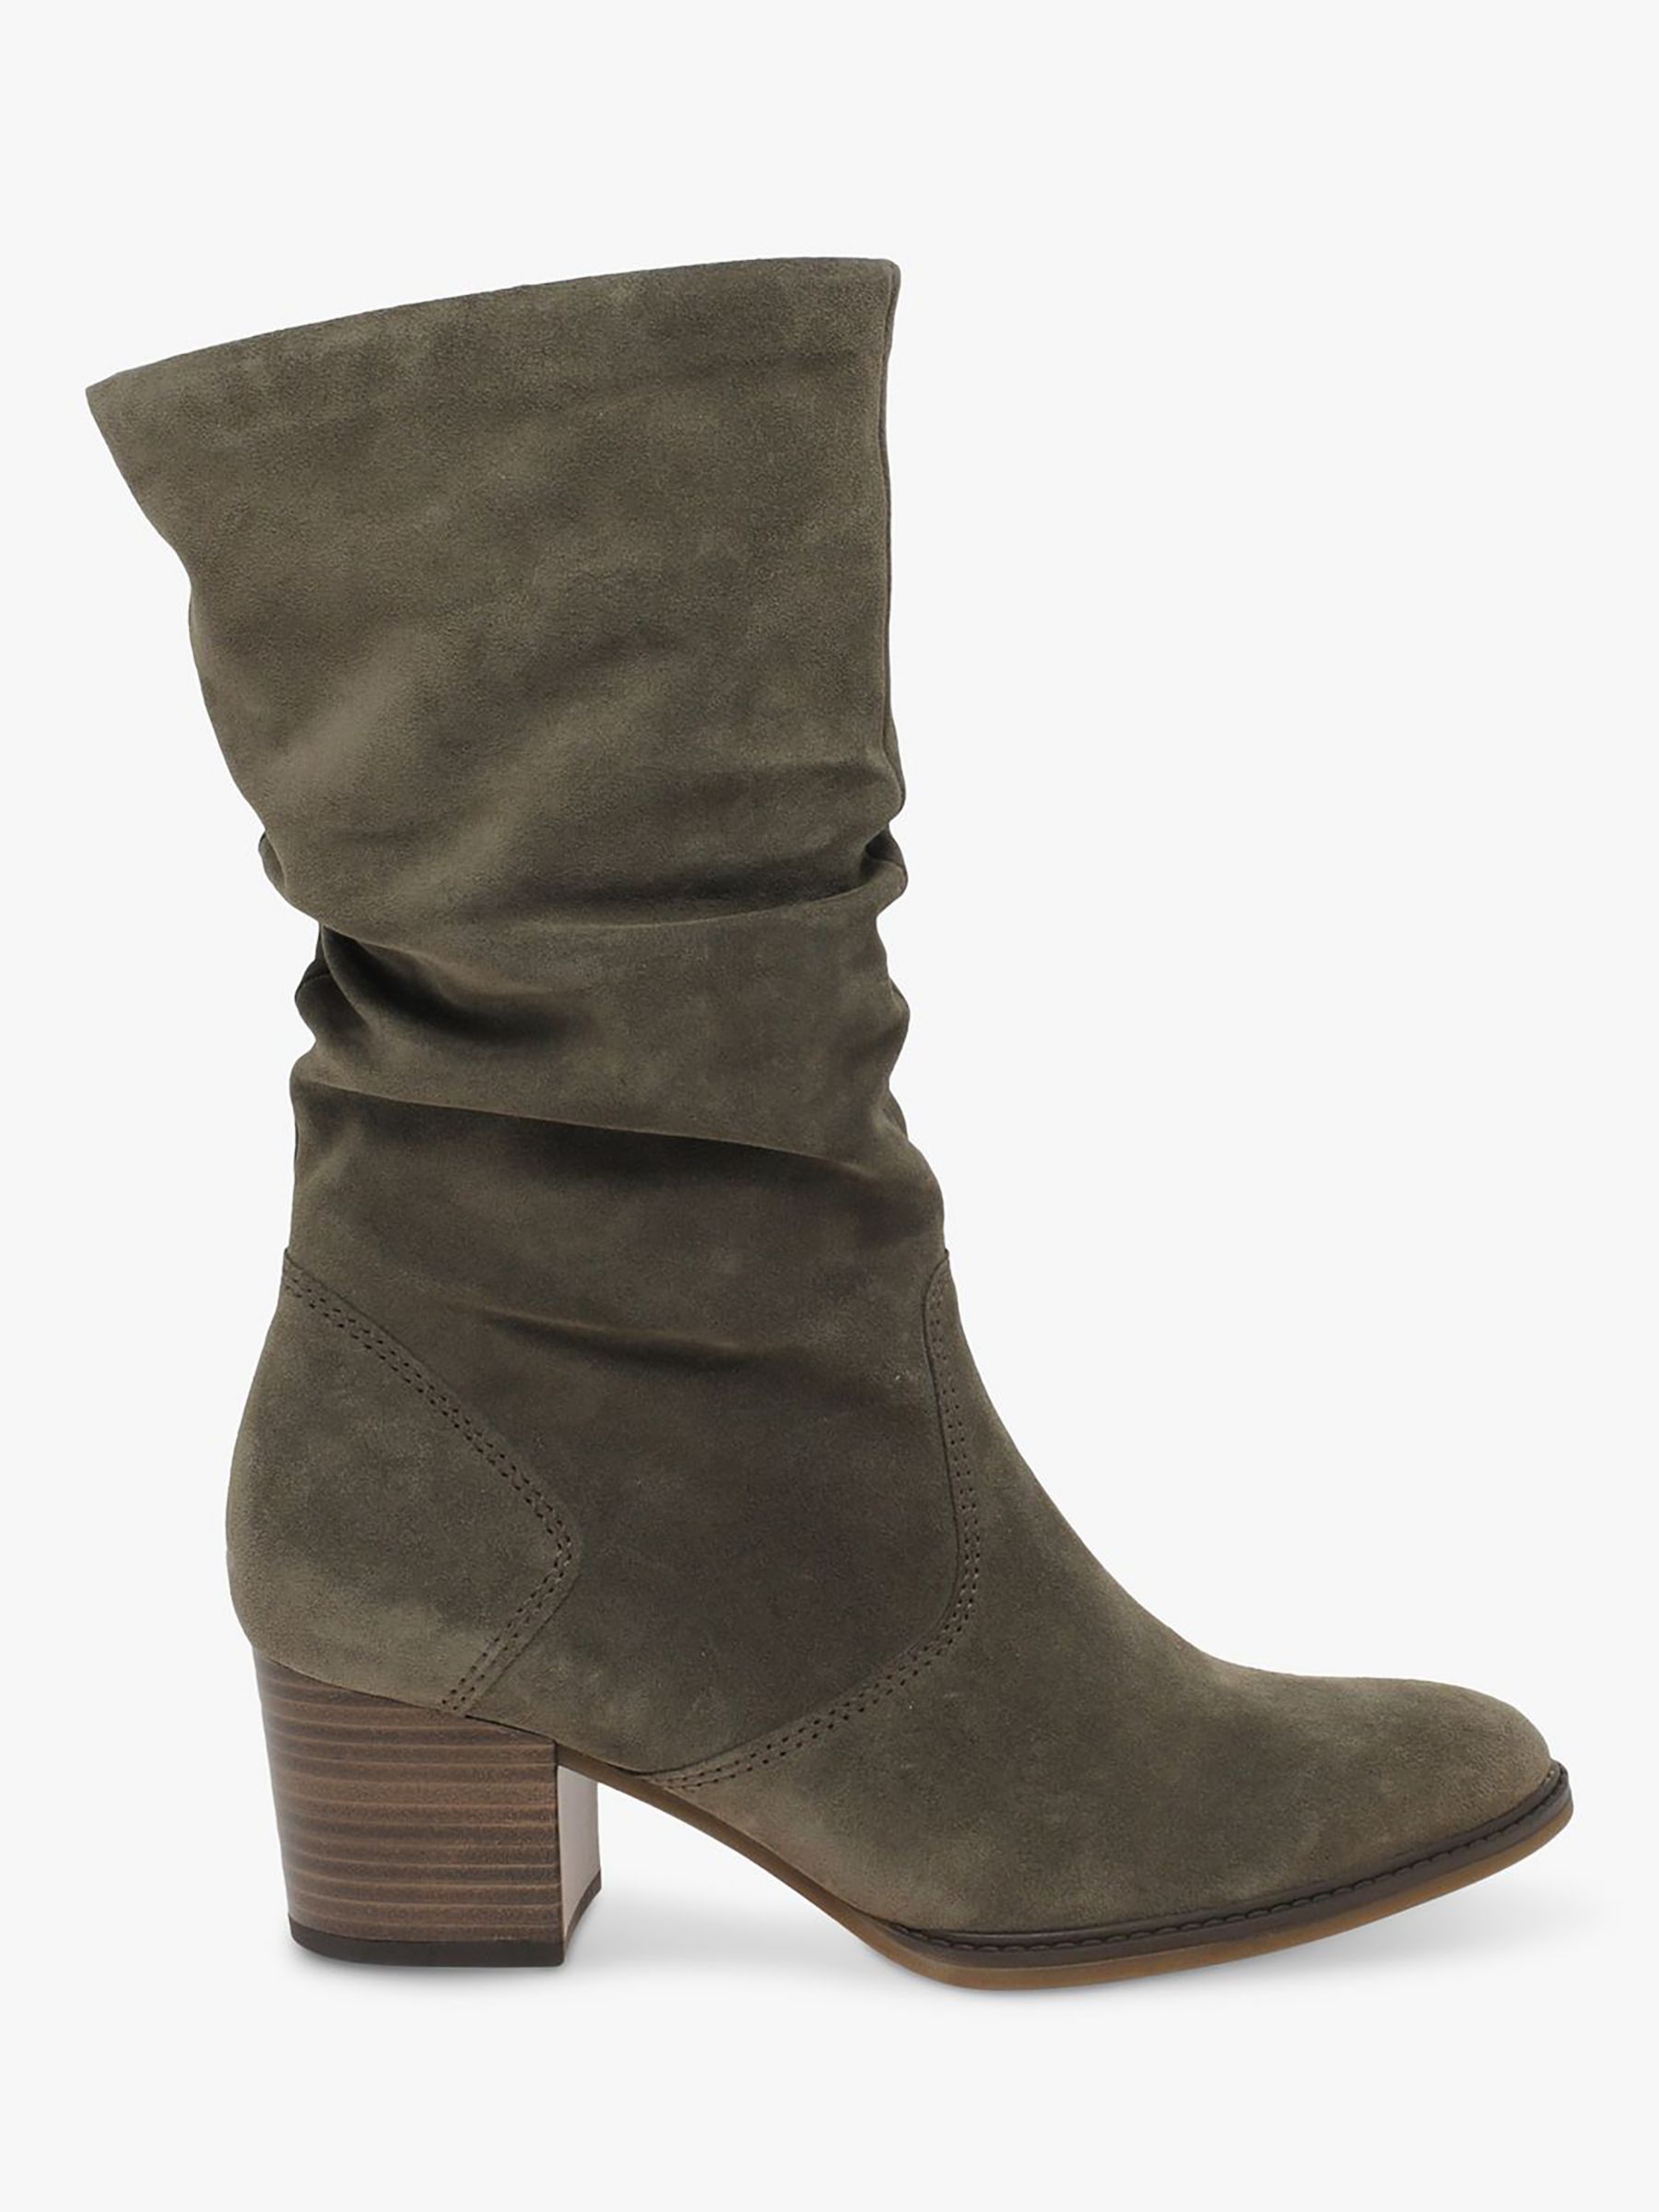 Ramona Wide Fit Suede Mid Leg Boots, at John Lewis & Partners